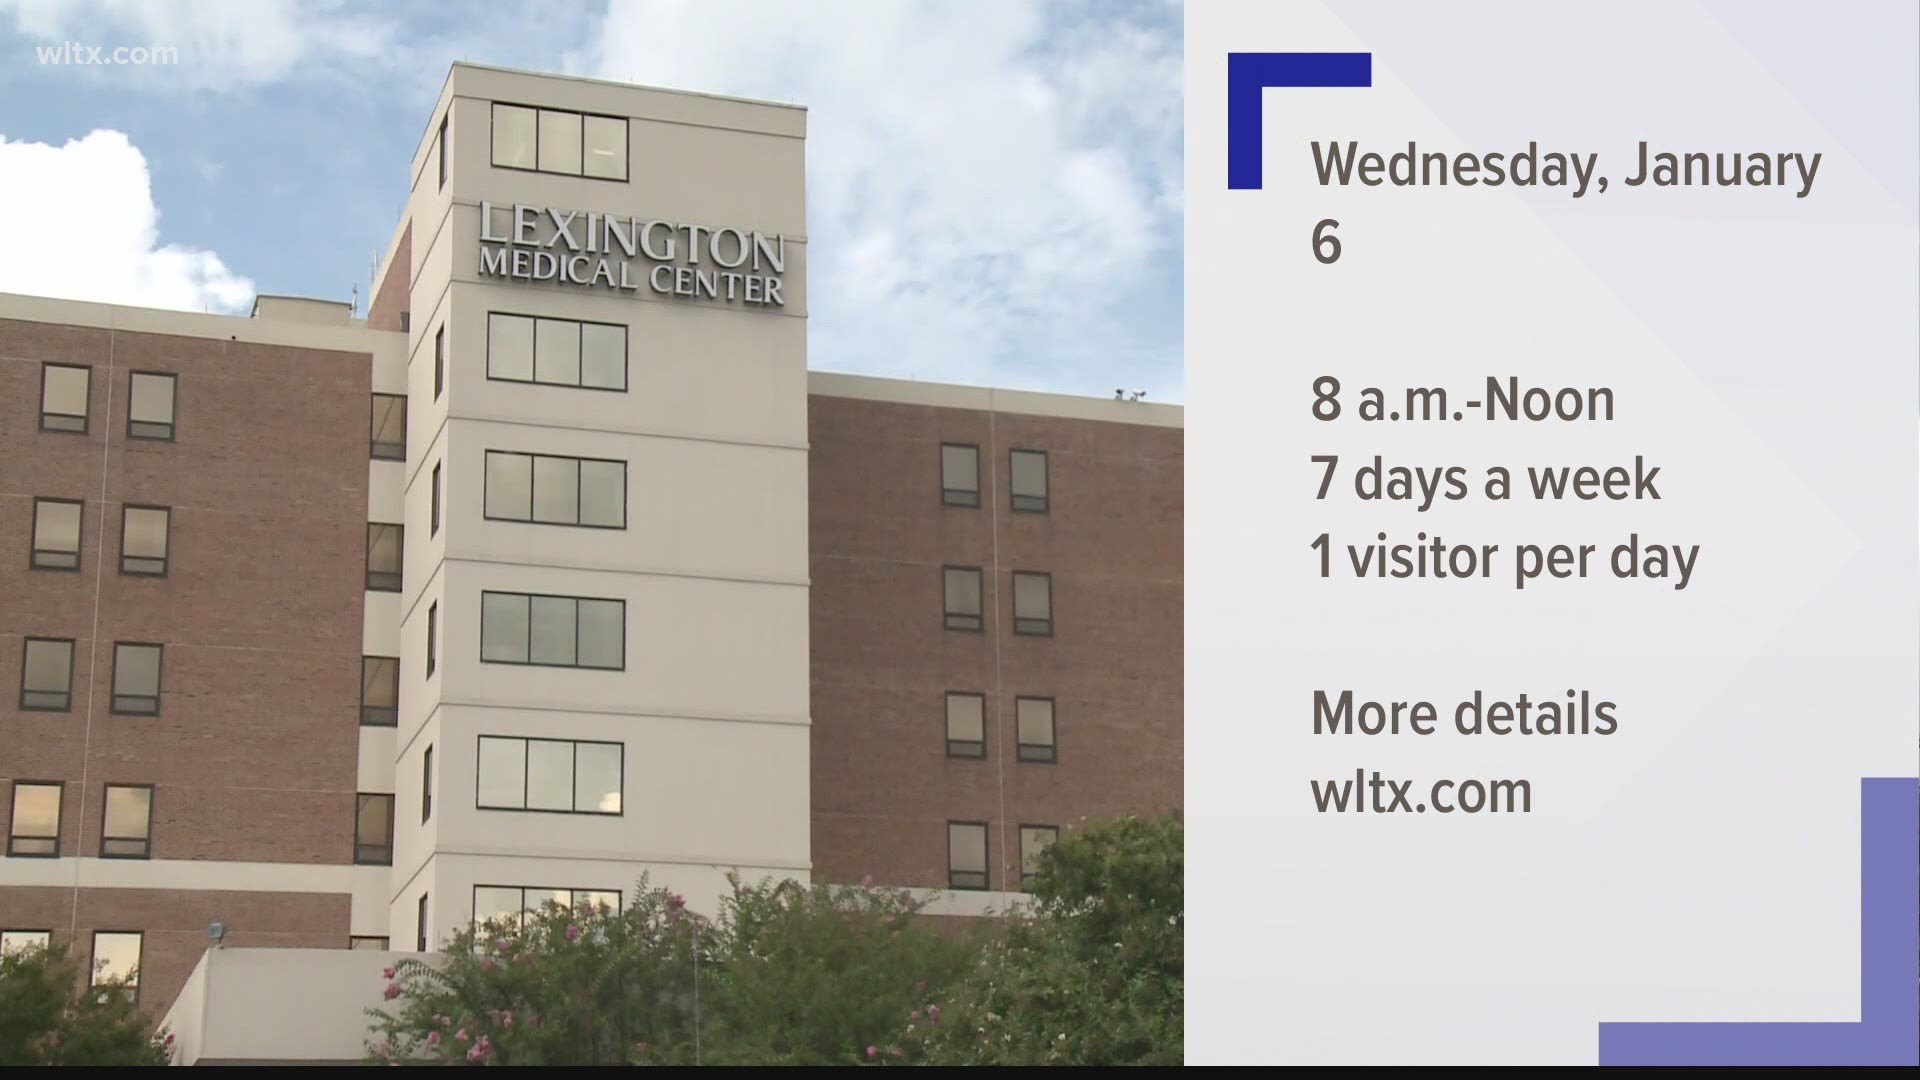 Lexington Medical Center is restricting visitation hours and number of visitors per day in attempt to slow the spread of coronavirus.